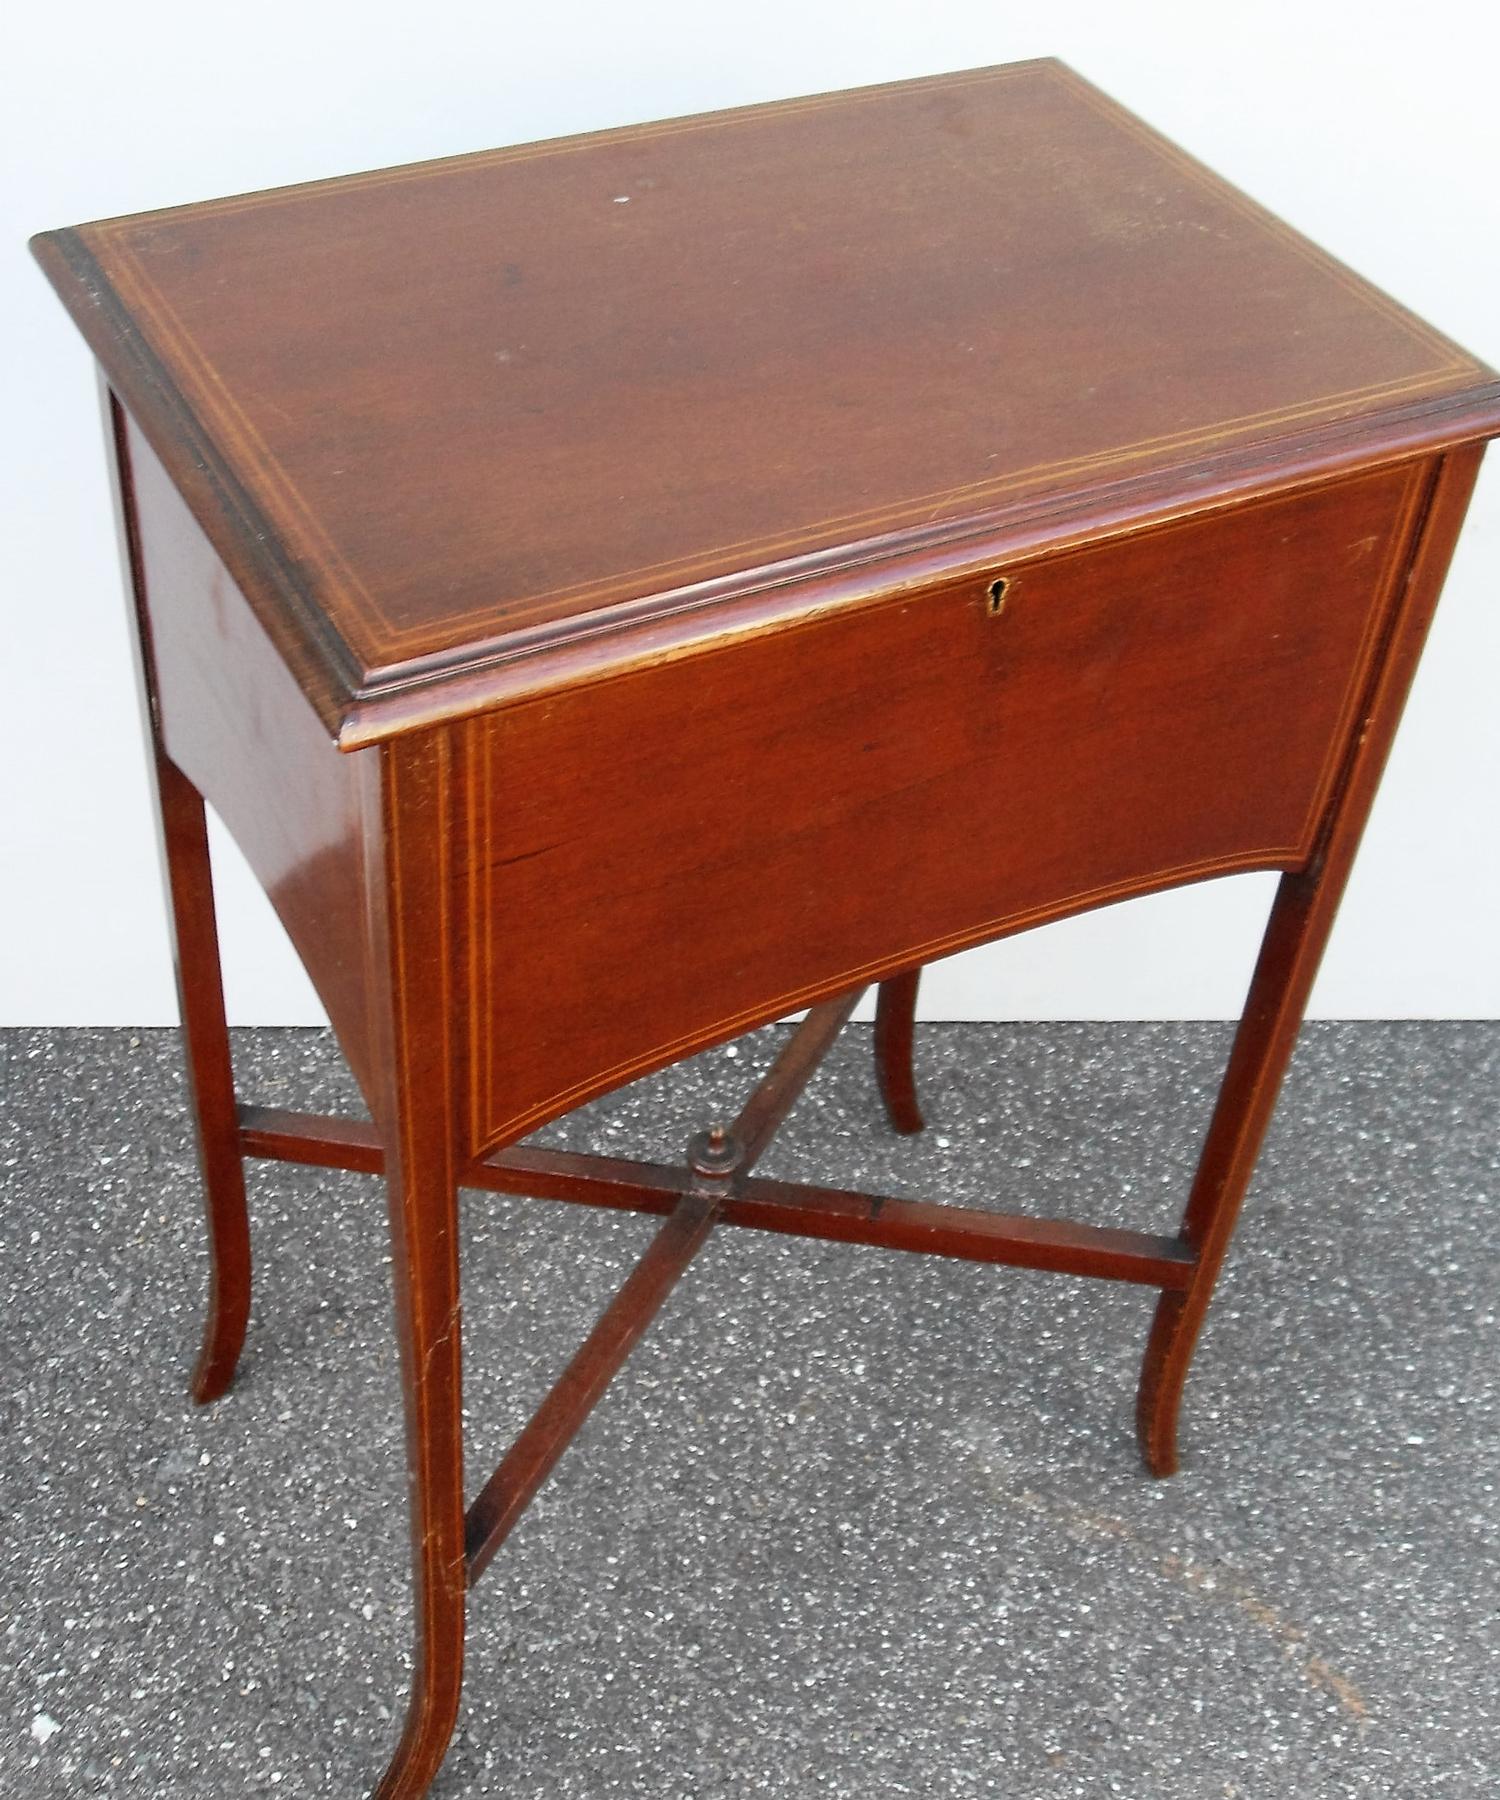 An Edwardian mahogany lady's work table with overall string inlay, hinged lid , fitted interior on